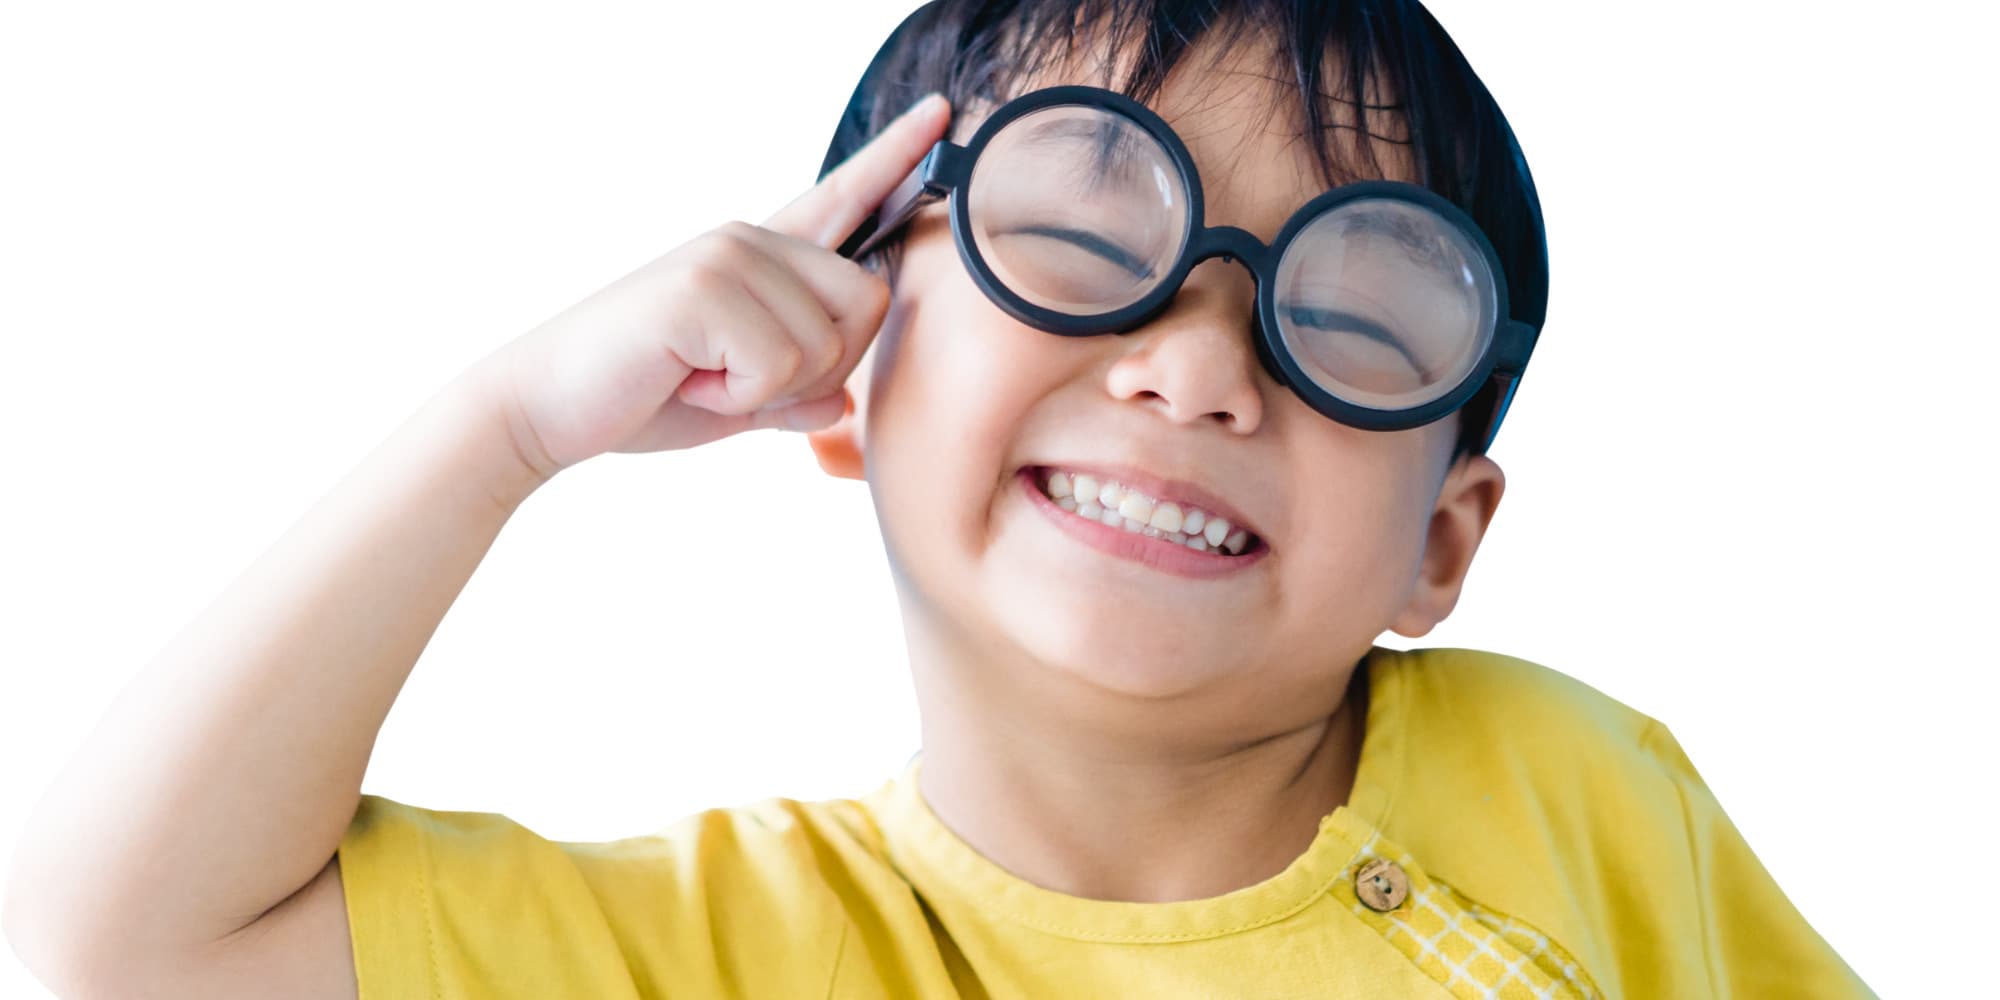 A child looking happy while wearing large rounded glasses.